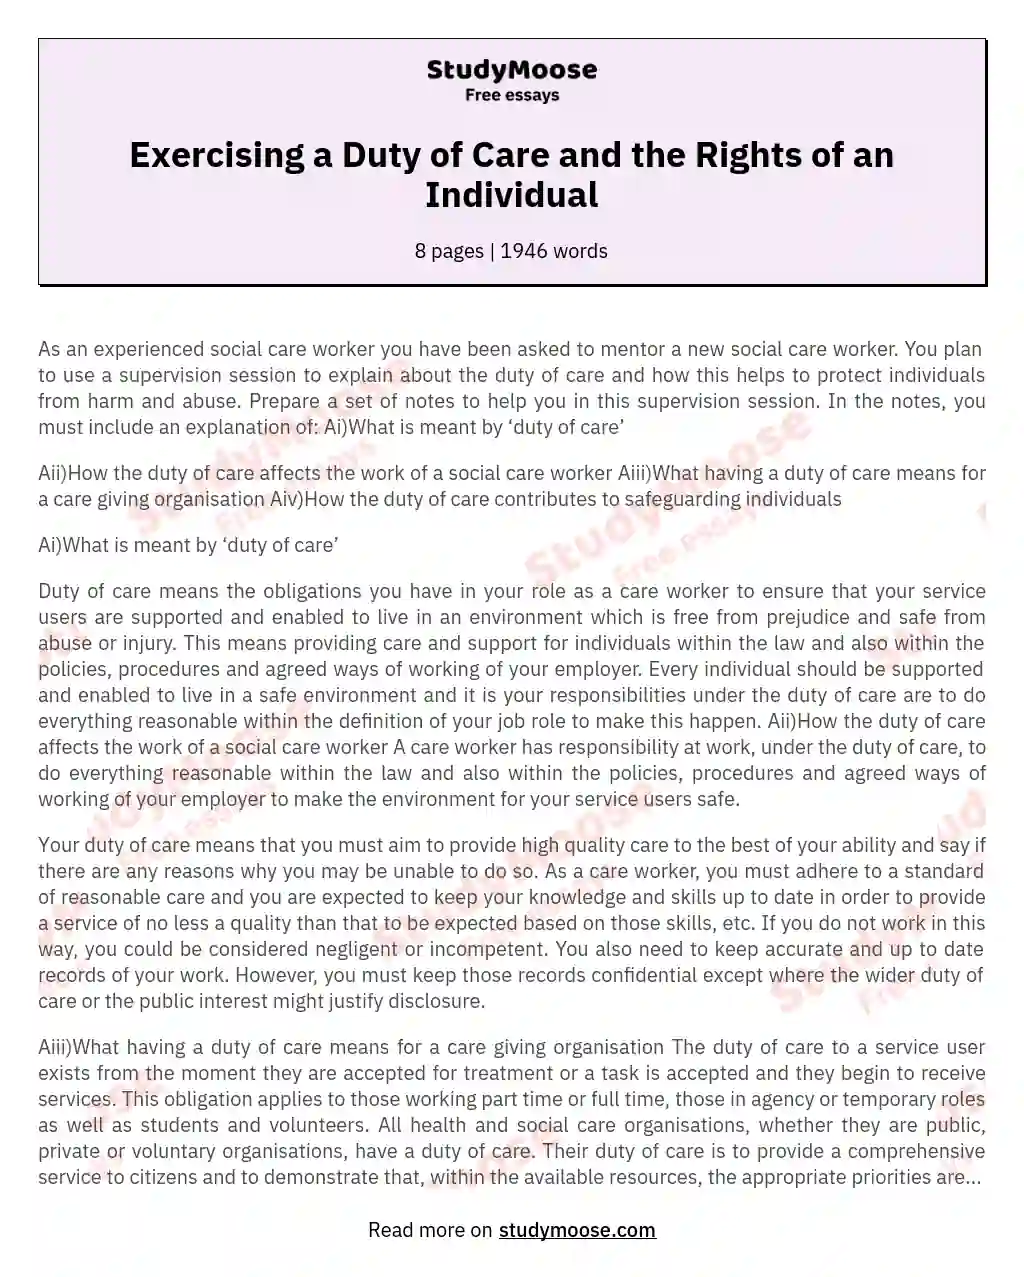 Exercising a Duty of Care and the Rights of an Individual